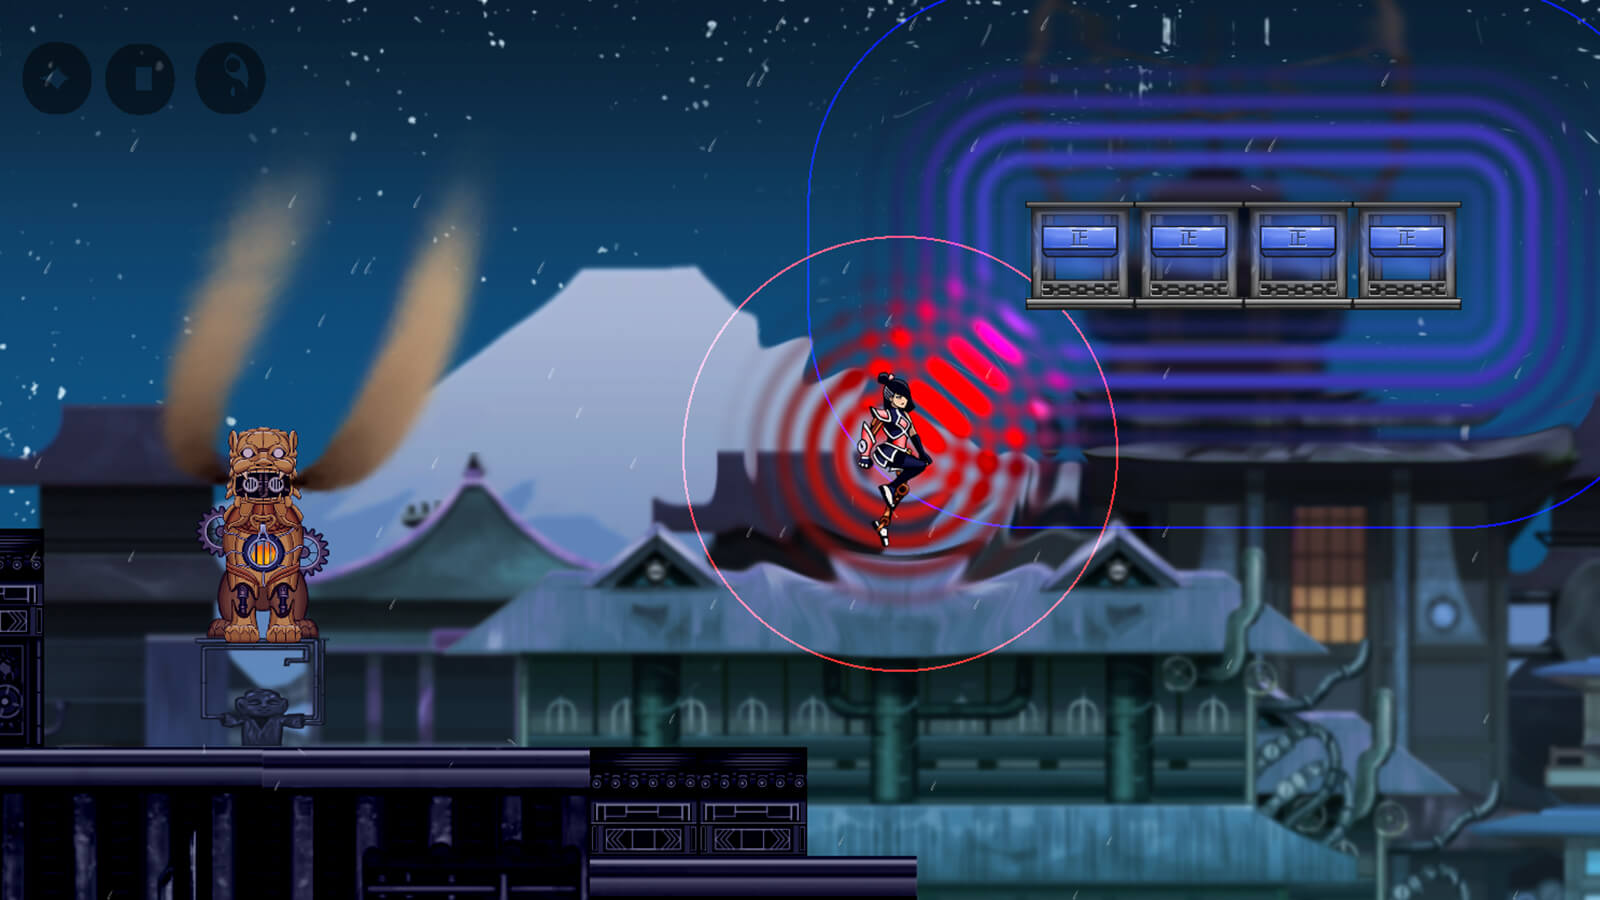 The game's half-automaton hero leaps through the air emanating red magnetic waves.